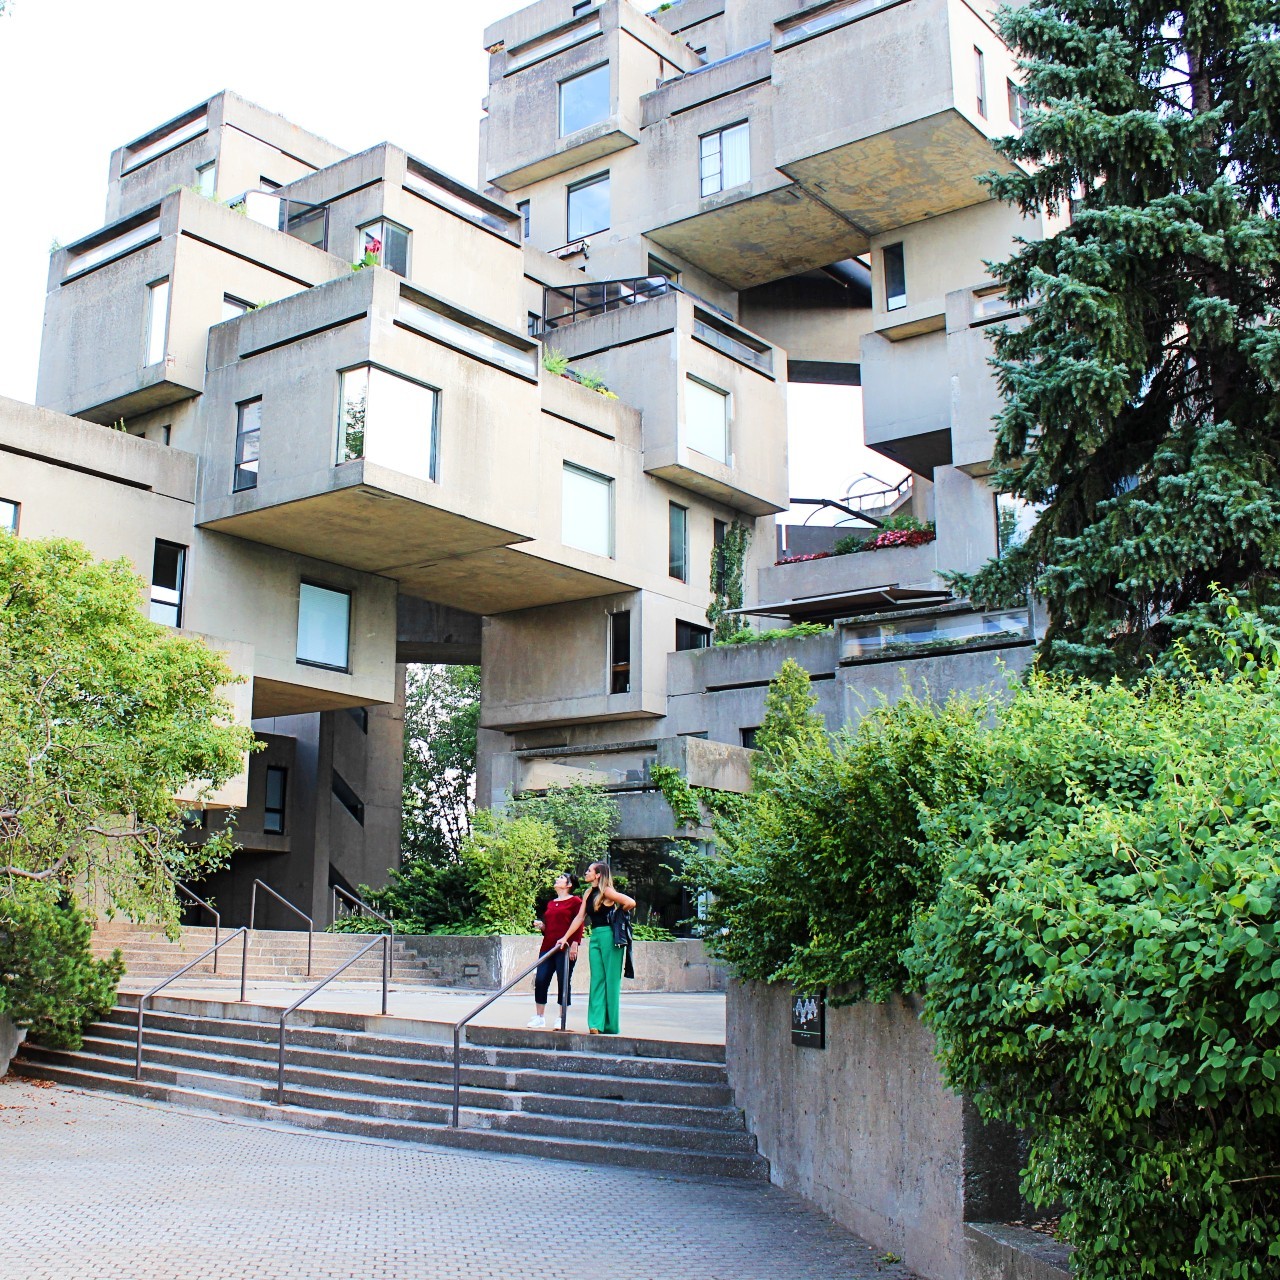 Habitat 67 - Montreal's architectural icon since 1967.